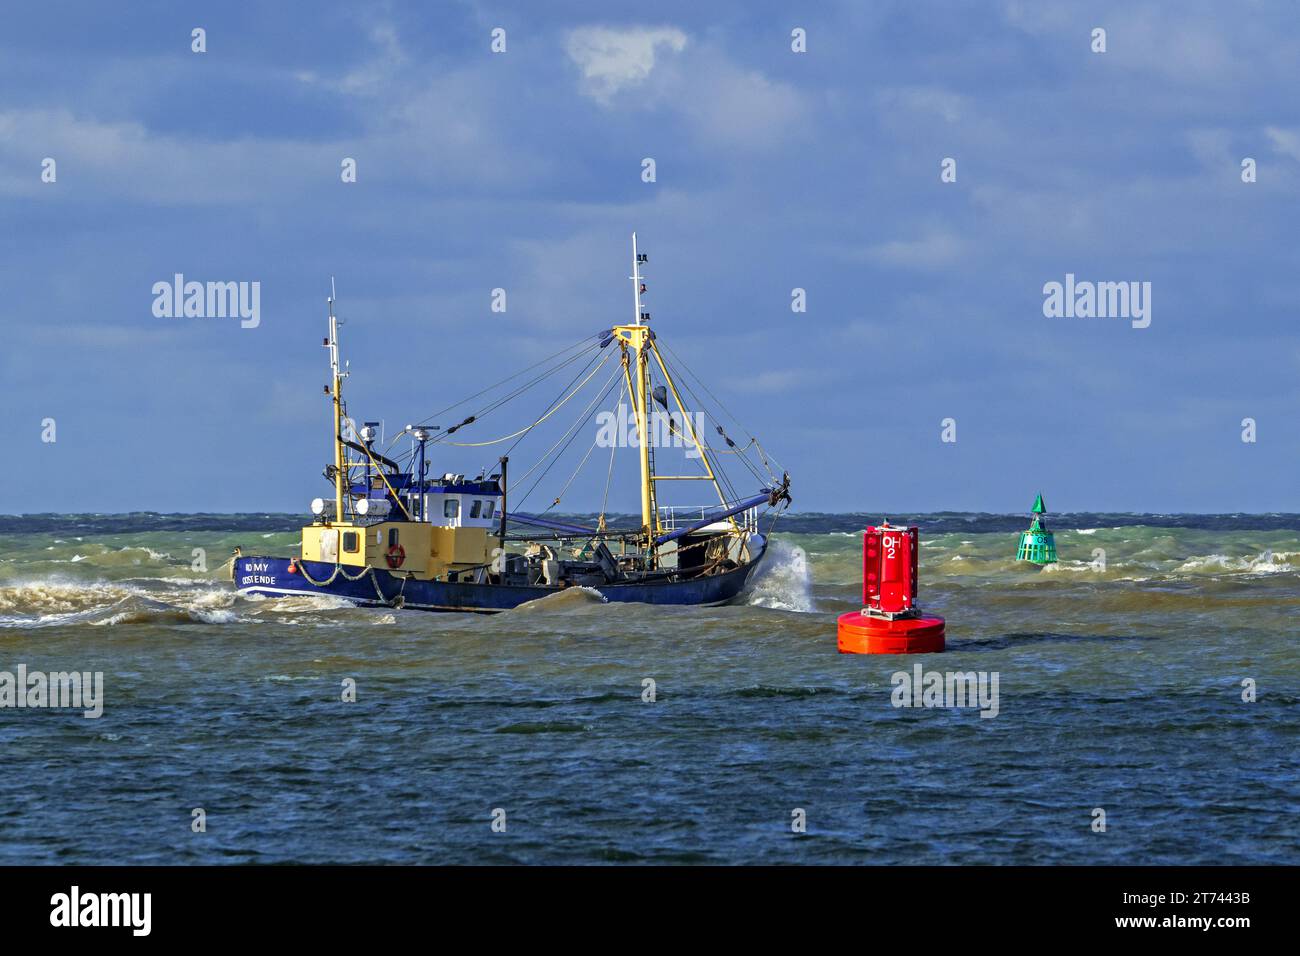 Shrimp cutter 0.191 Romy leaving the Ostend port to go bottom trawling for shrimps along the North Sea coast on a stormy day, Belgium Stock Photo